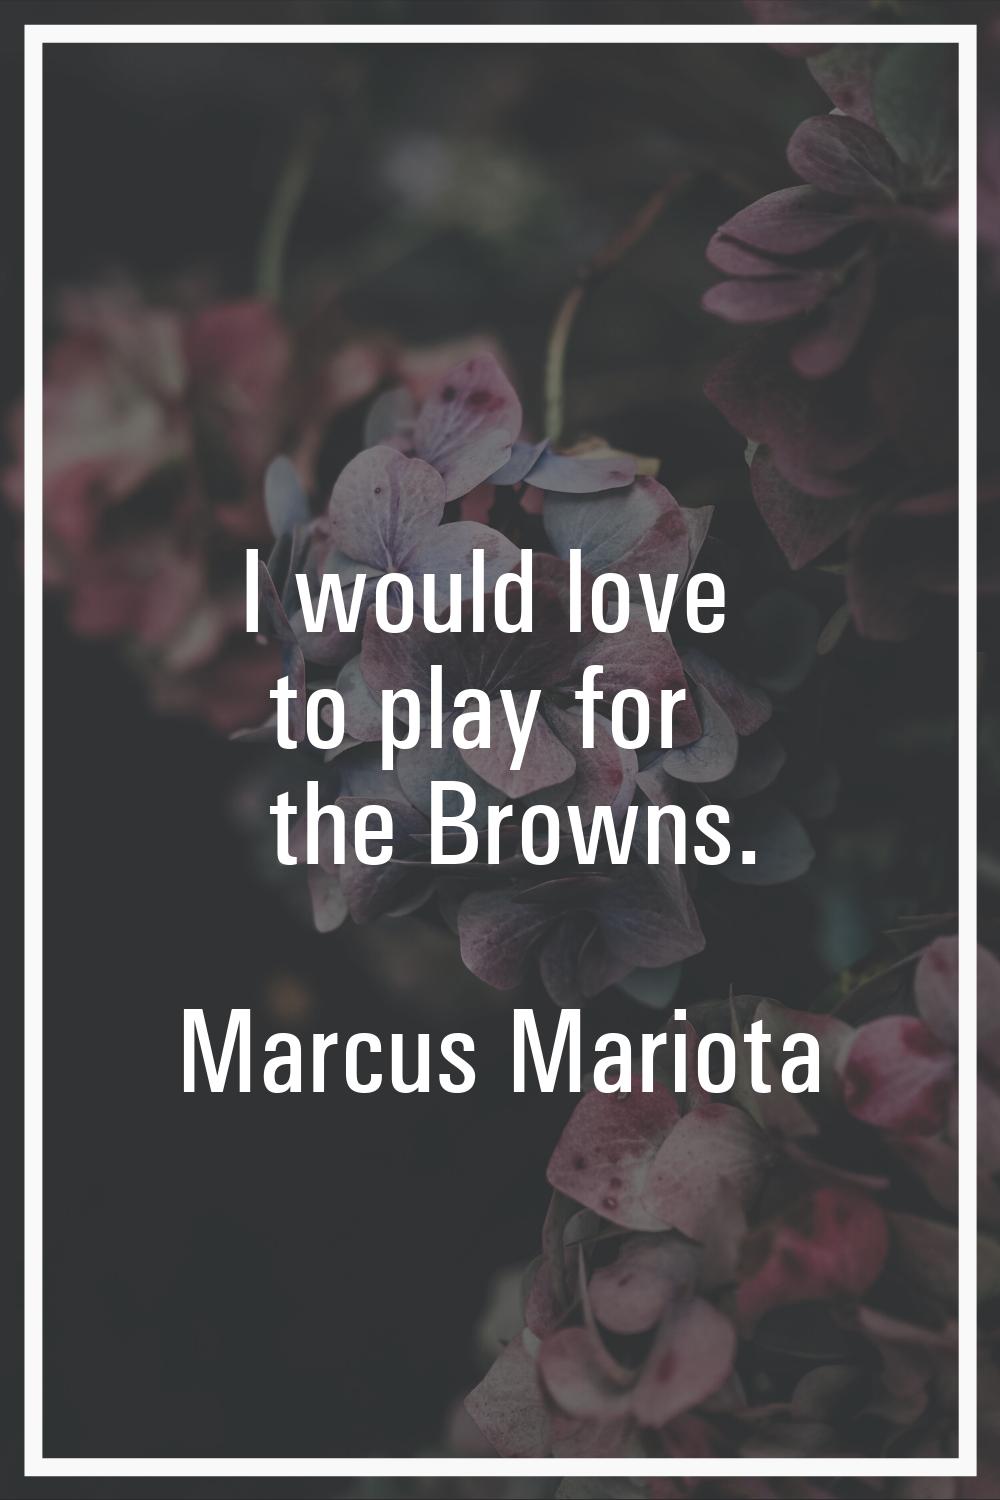 I would love to play for the Browns.